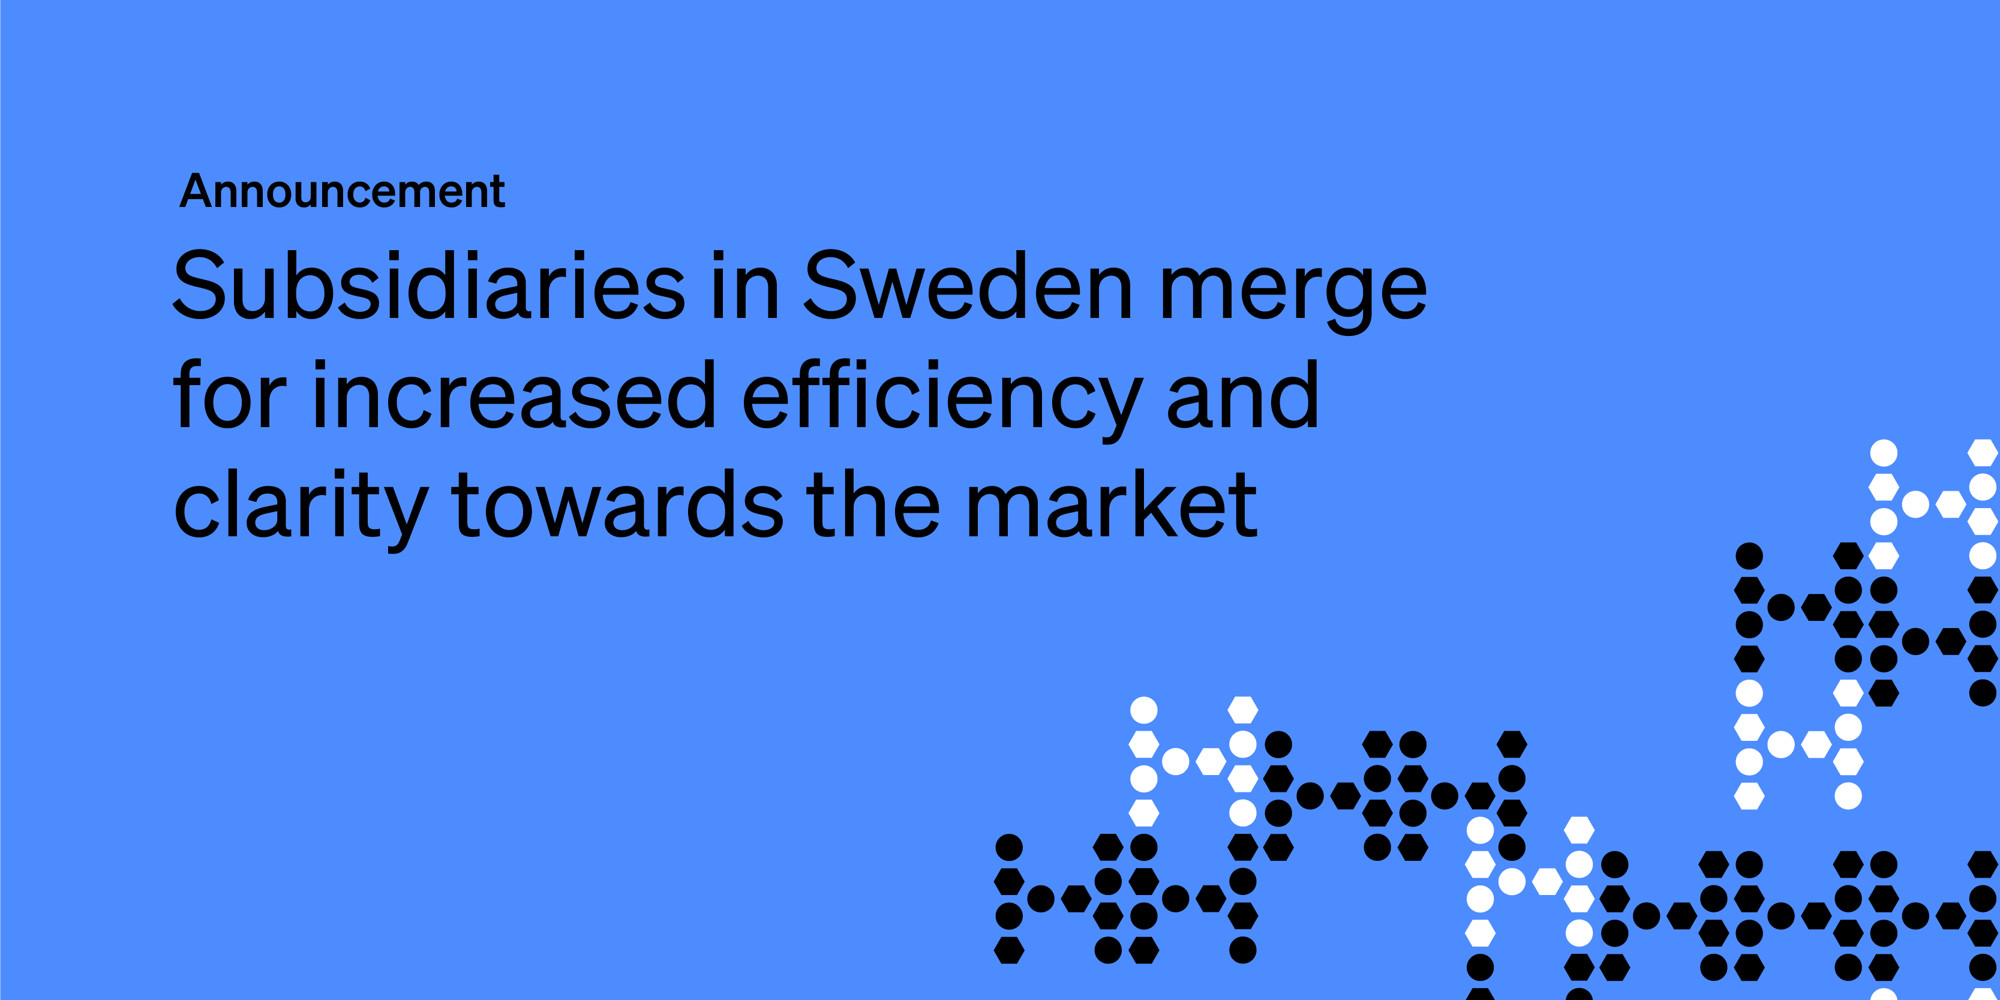 Subsidiaries in Sweden merge for increased efficiency and clarity towards the market